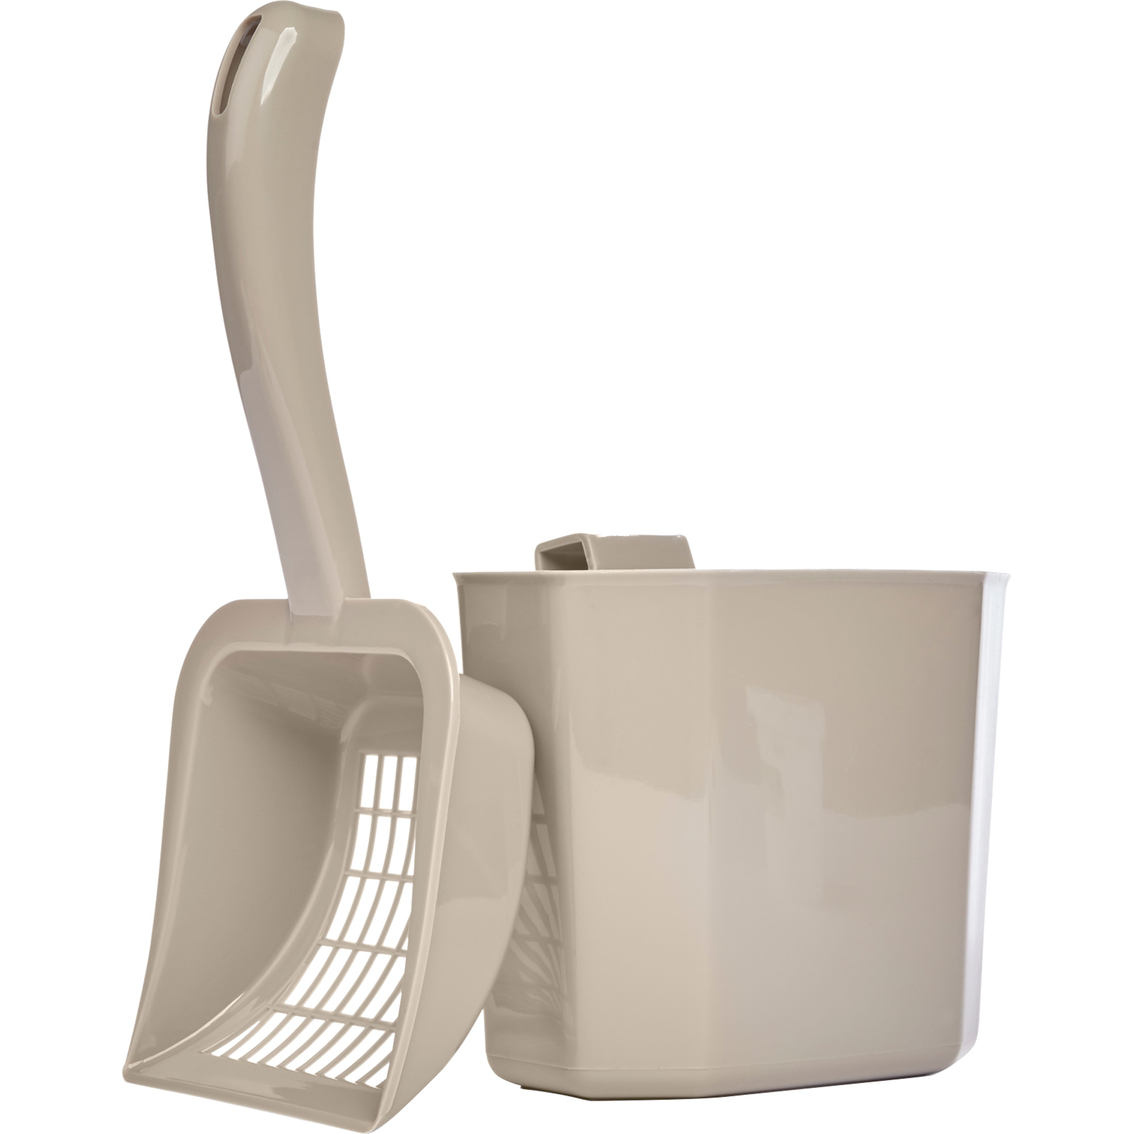 So Phresh Scoop and Holder with Receptacle Cat Litter - Image 3 of 4